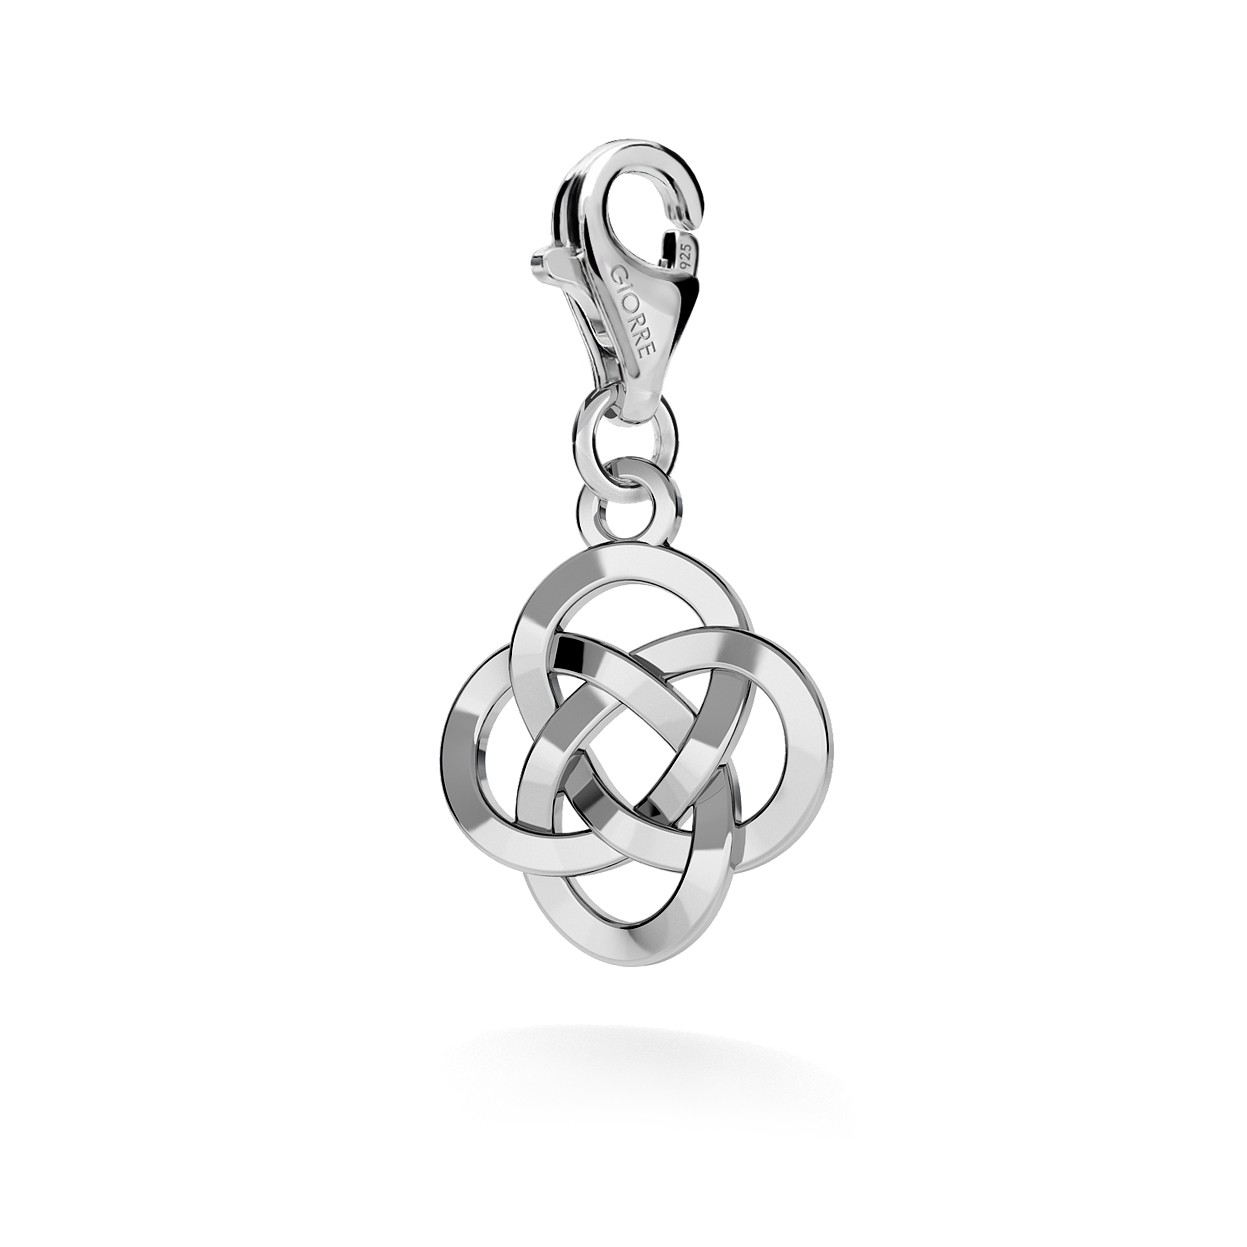 CHARM 81, CELTIC SIGN, SILVER 925, RHODIUM OR GOLD PLATED